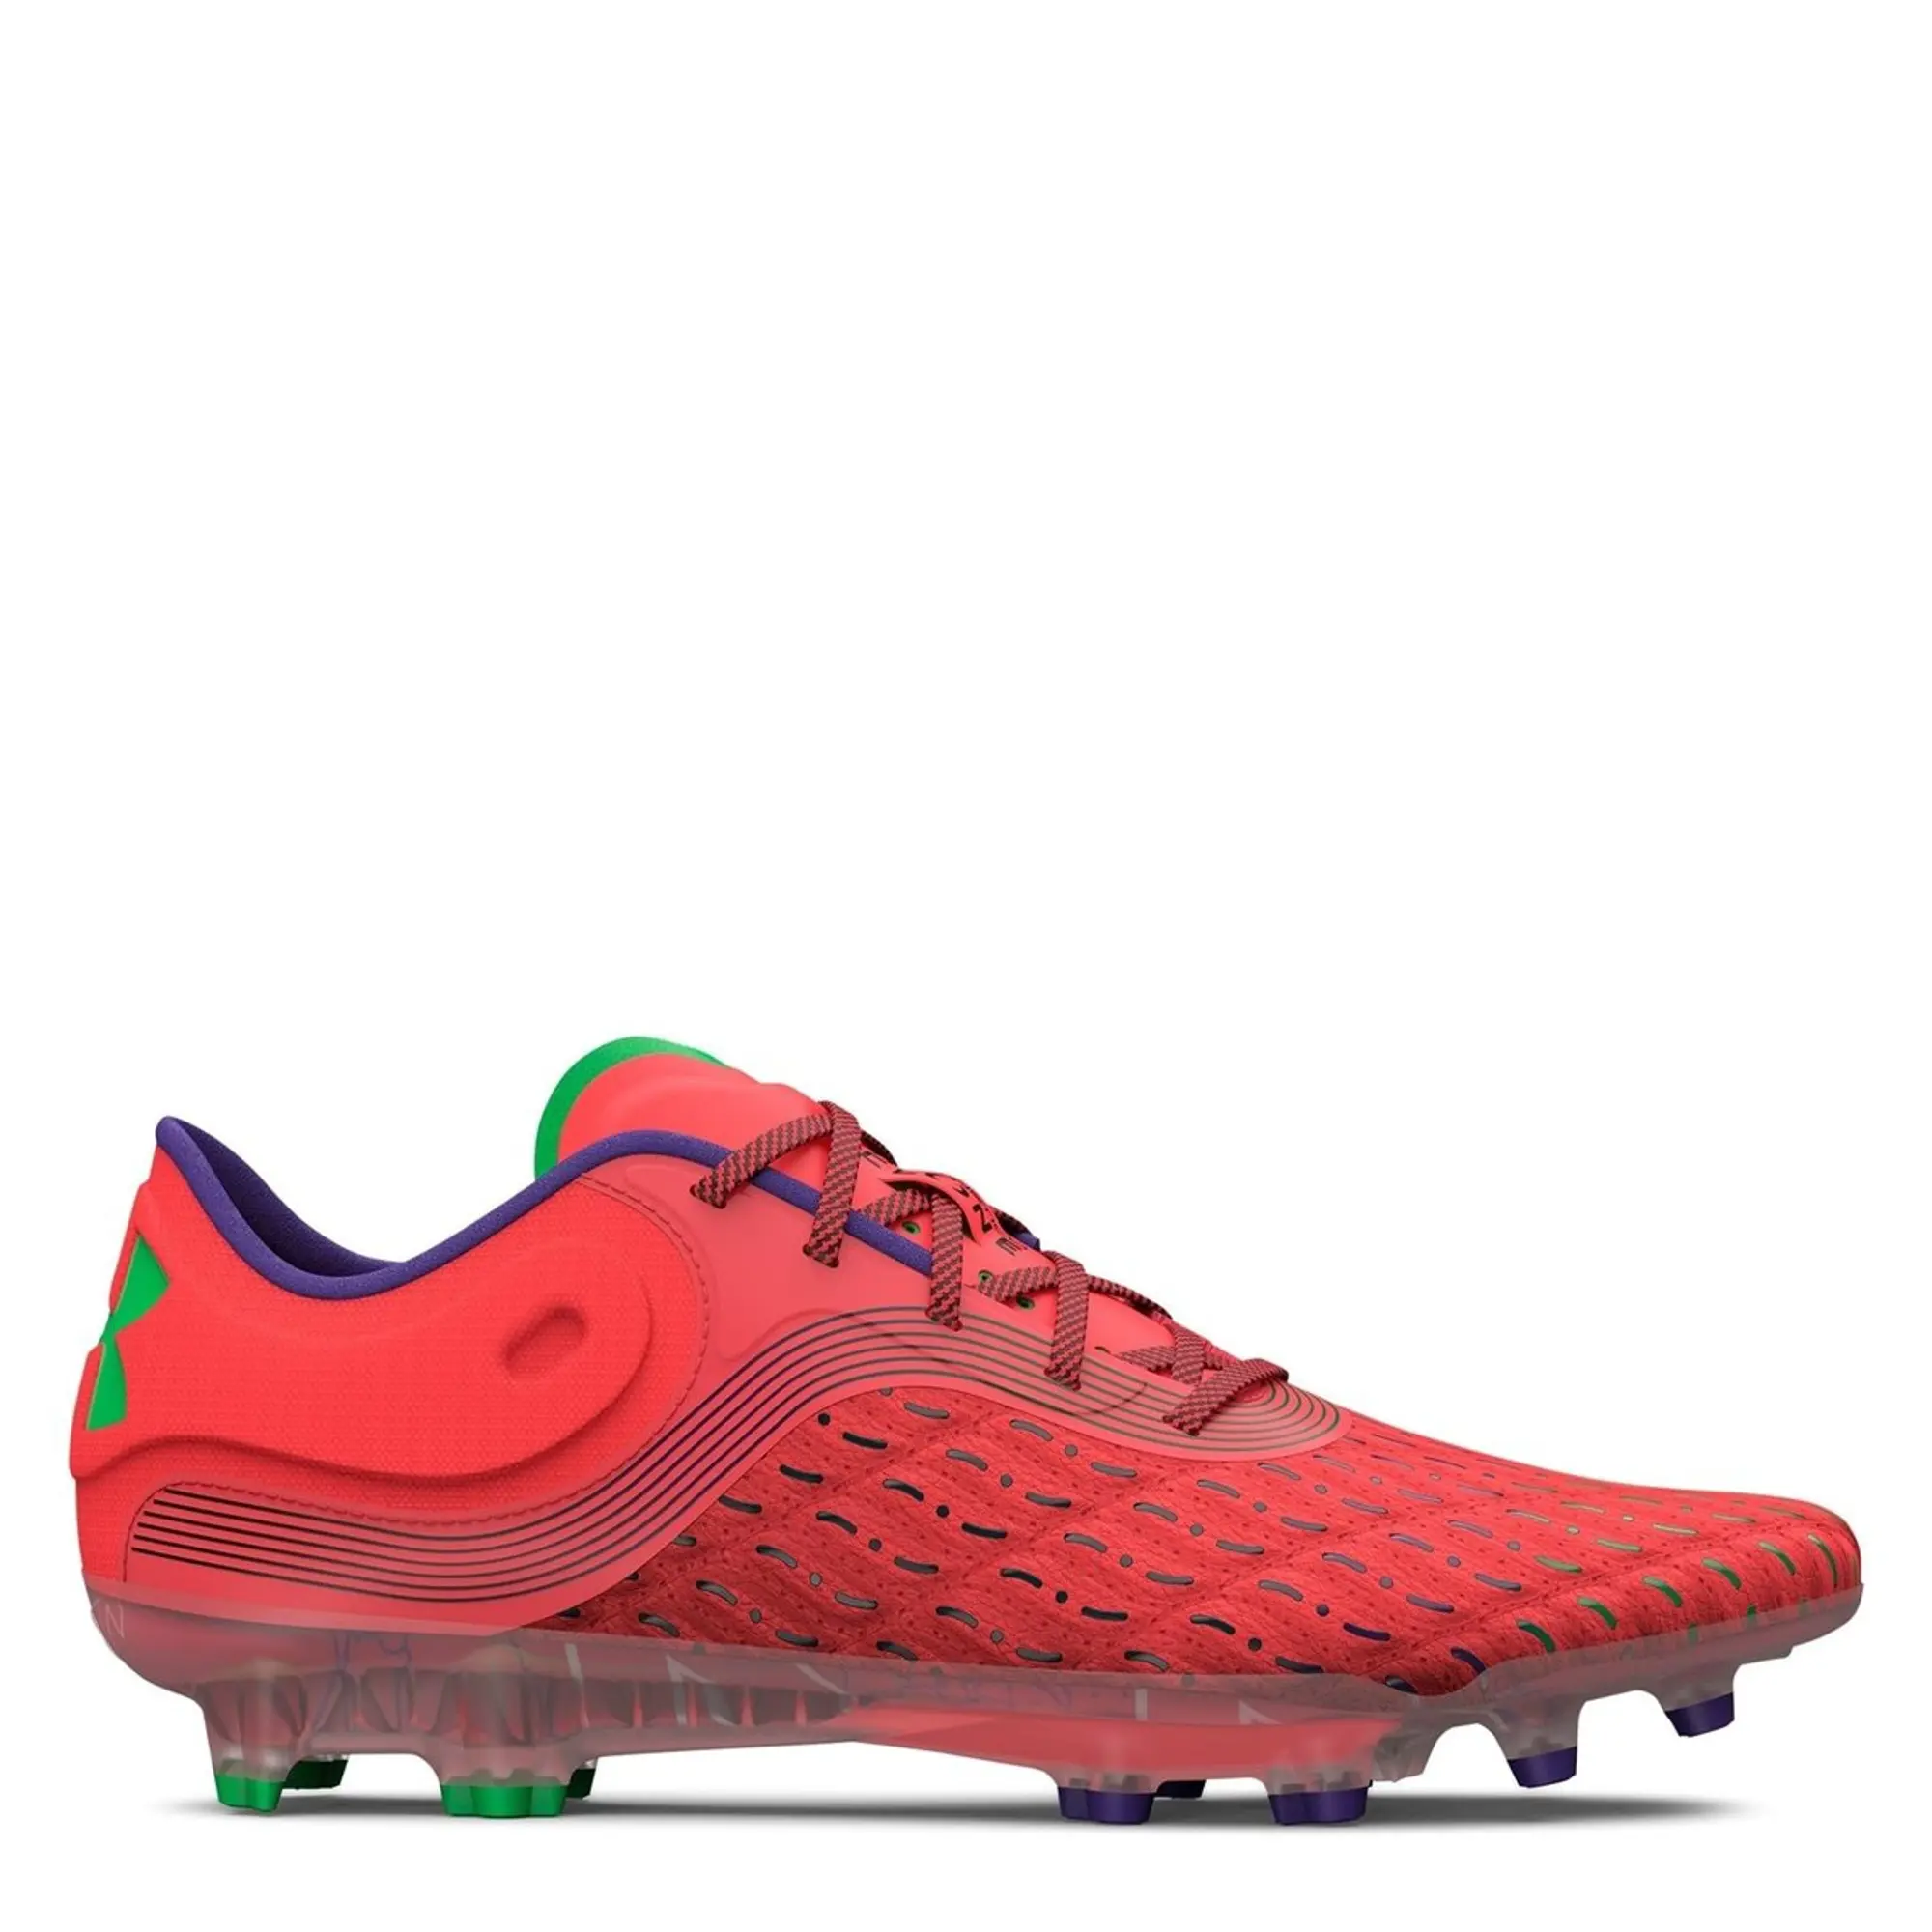 Under Armour Clone Magnetico Pro FG Football Boots Mens